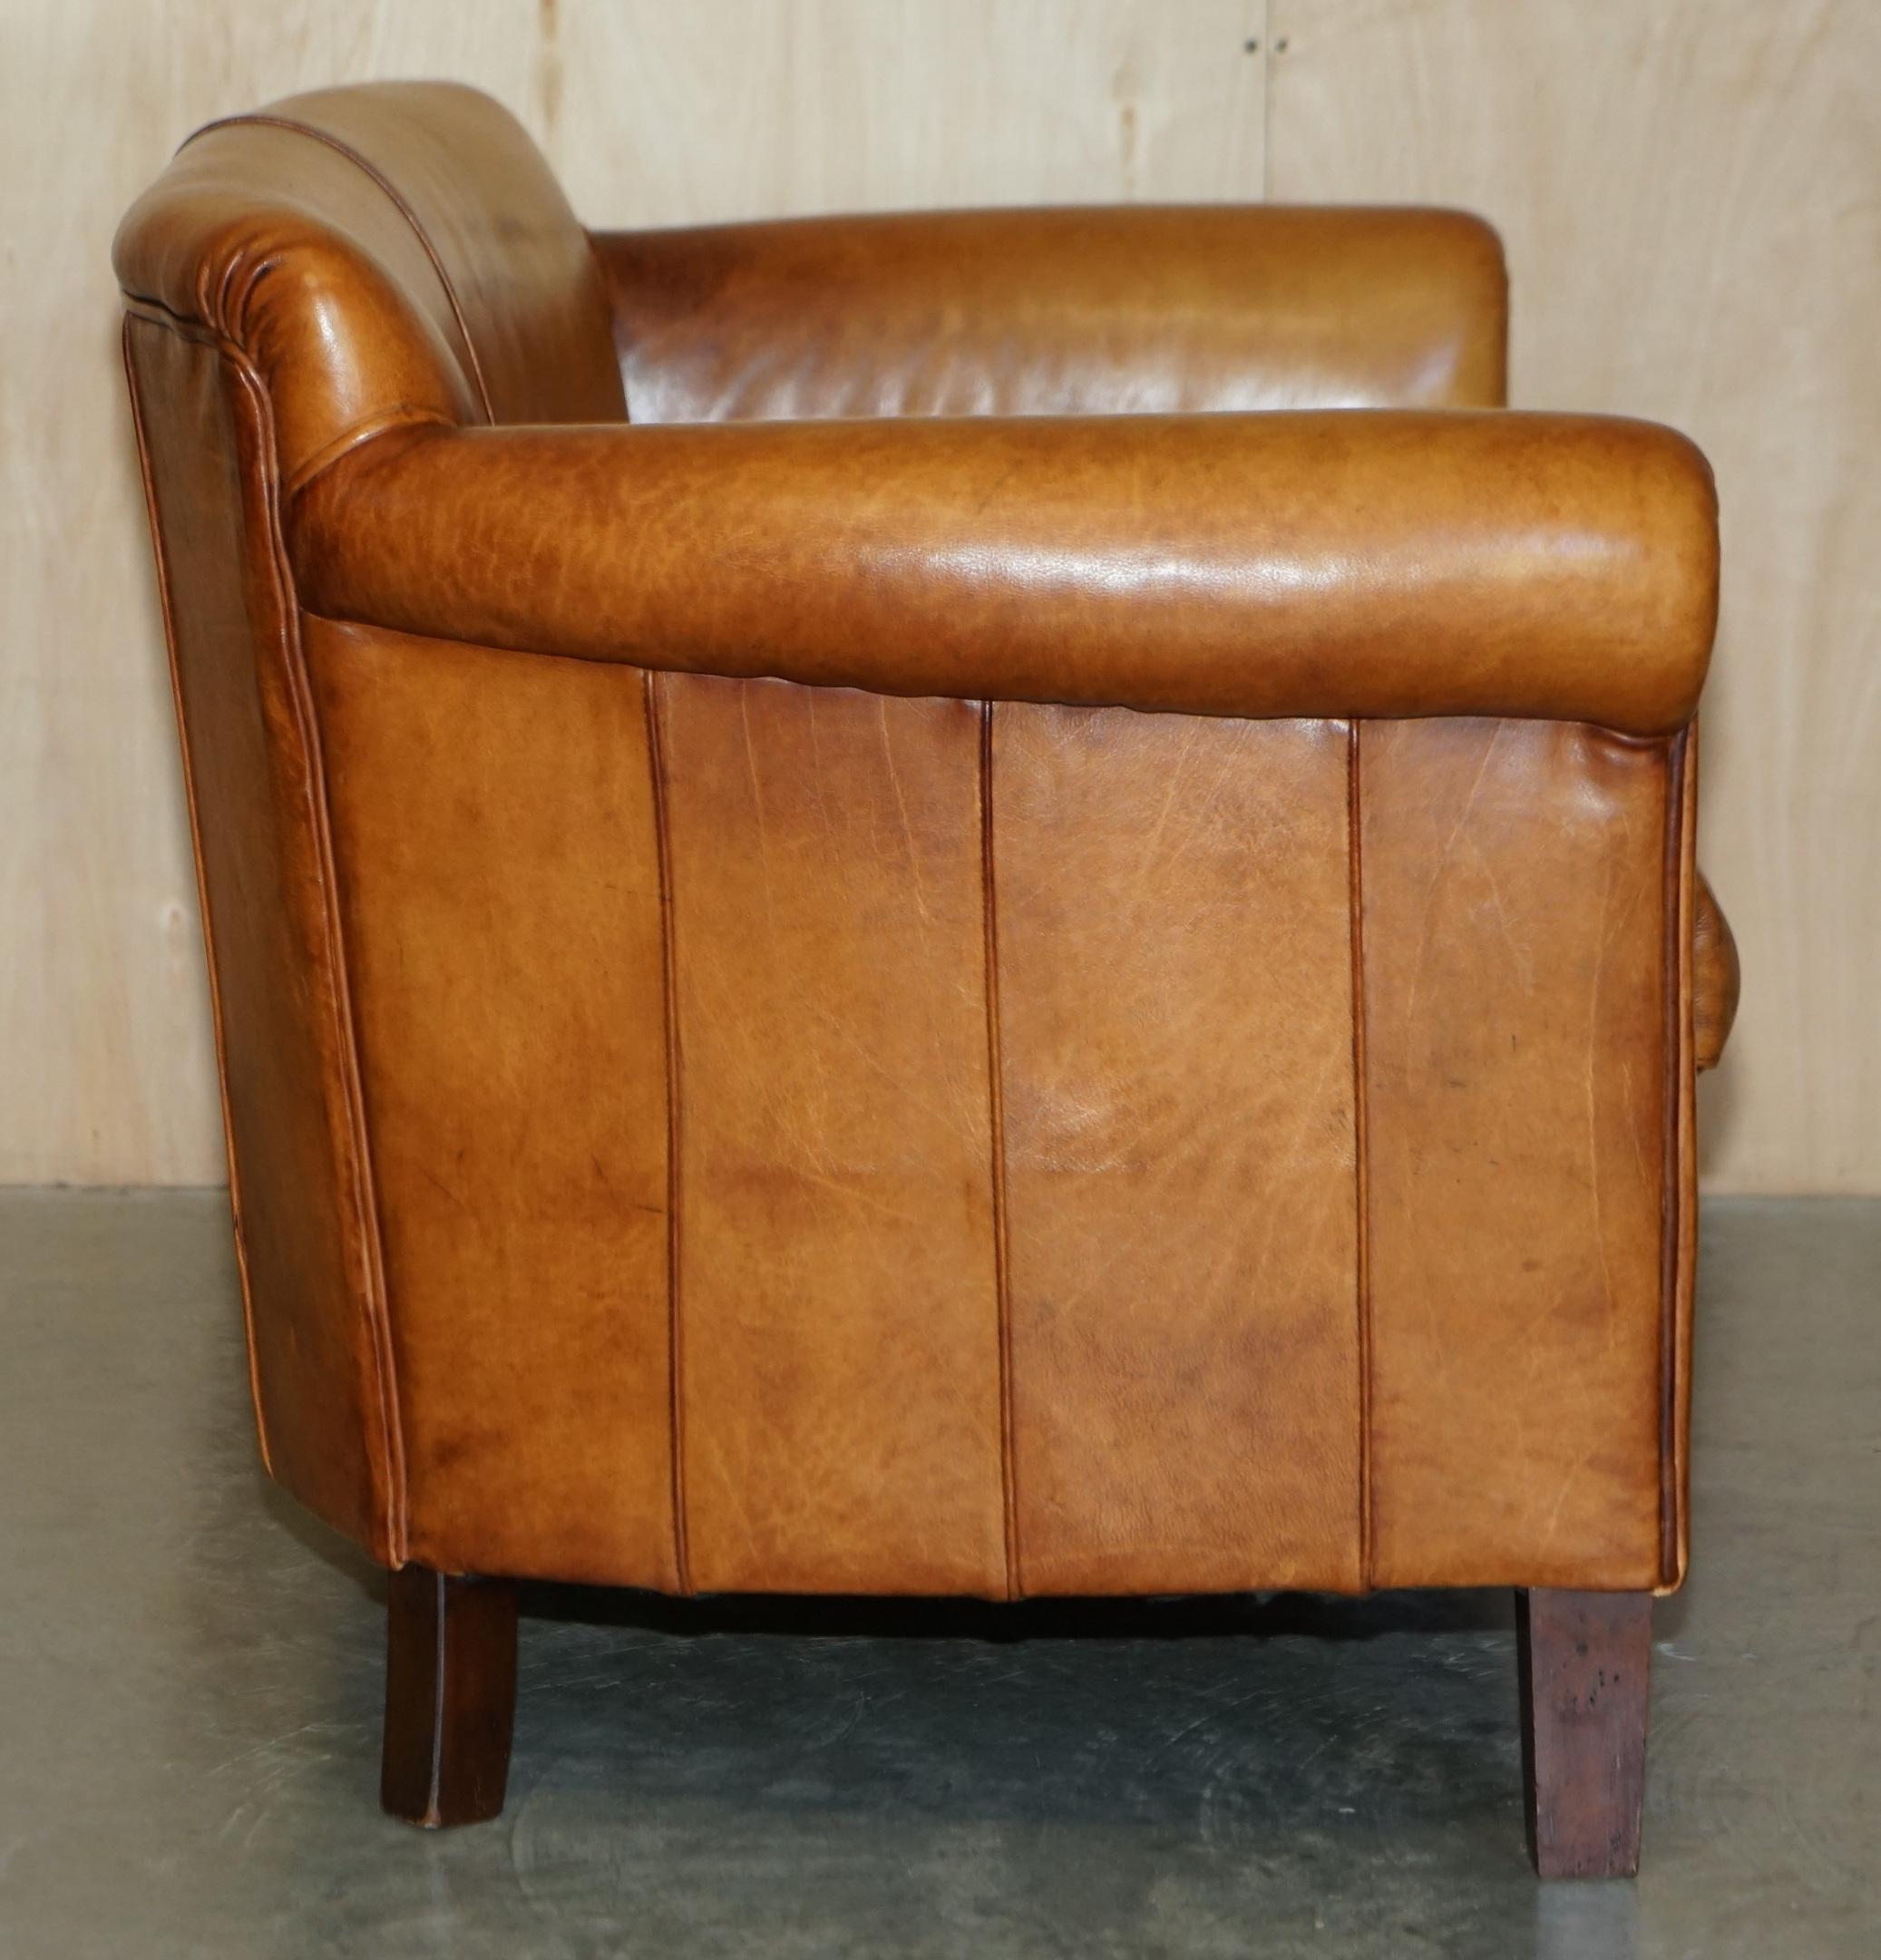 Rare John Lewis Camford Heritage Brown Leather Armchair & Two Seat Sofa Suite For Sale 10